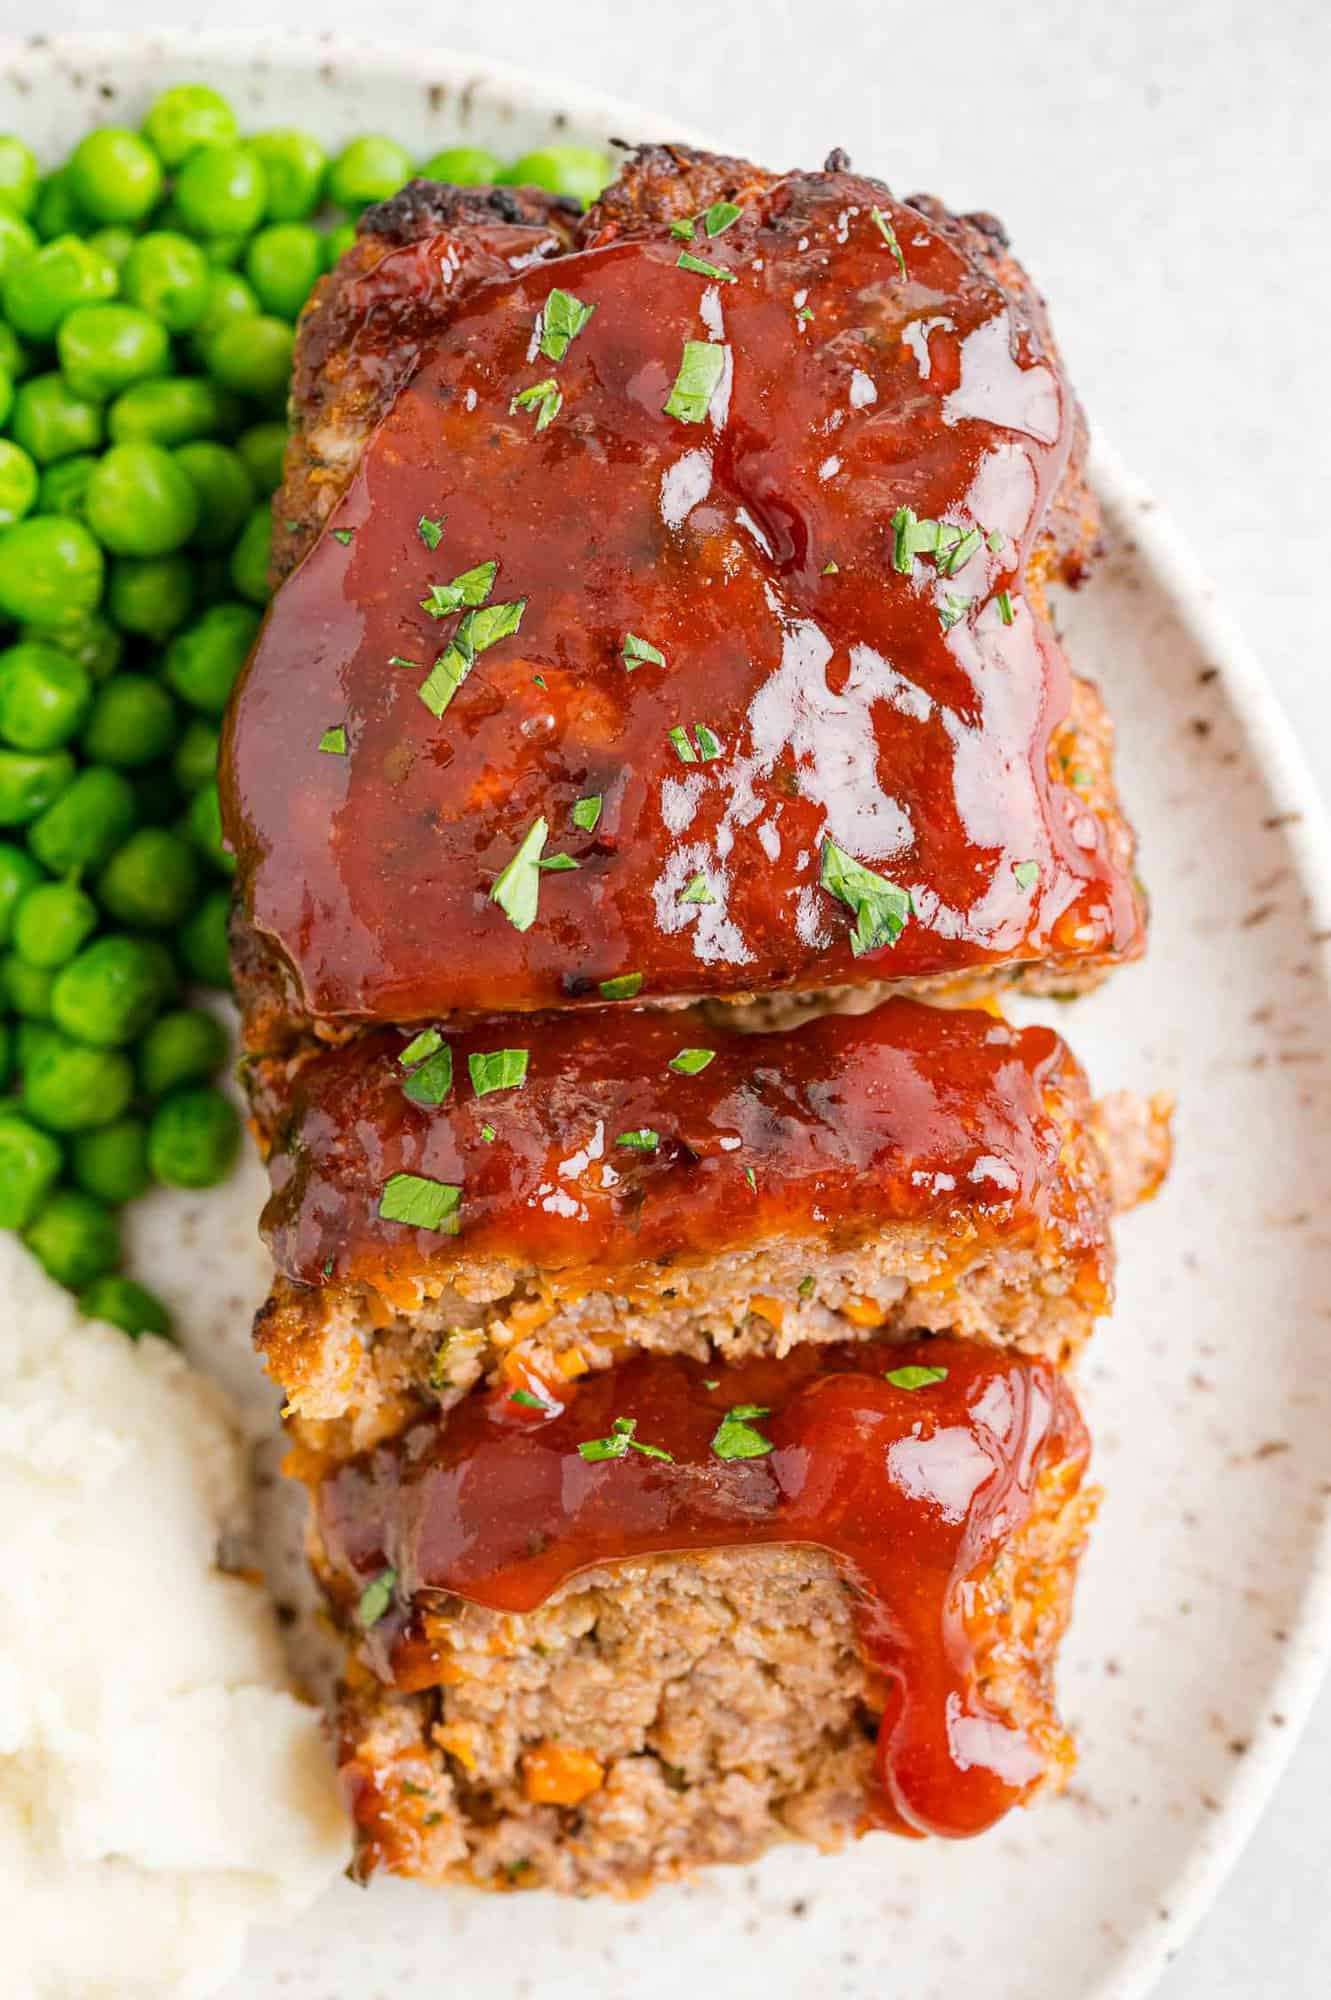 Air fryer meatloaf, cut into slices, on a place with peas and potatoes.